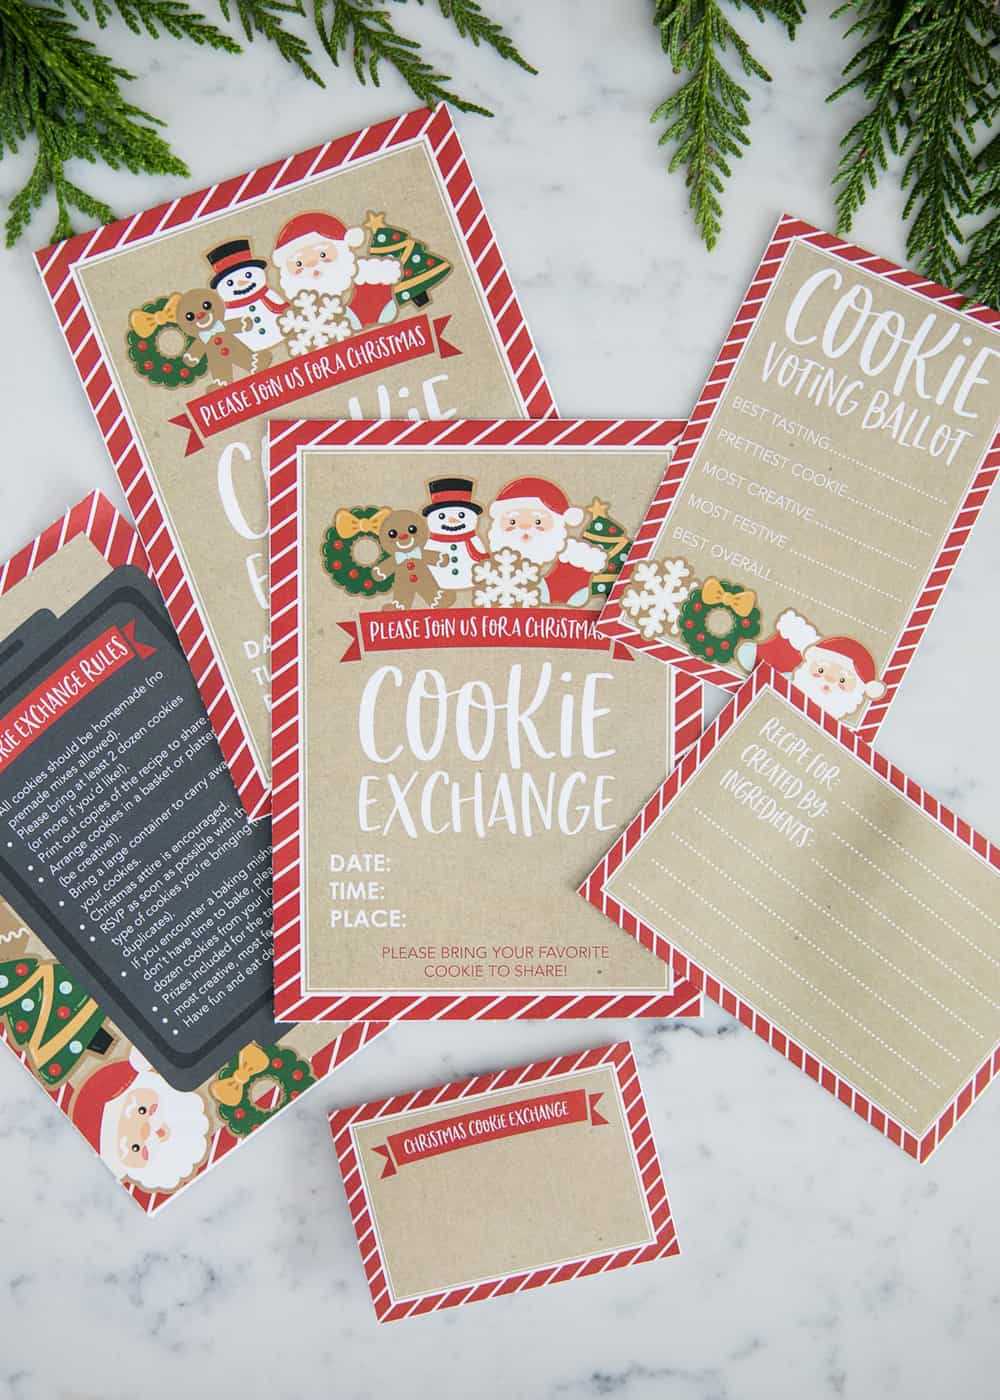 How To Host A Cookie Exchange (W/ Free Printables!) – I Pertaining To Cookie Exchange Recipe Card Template